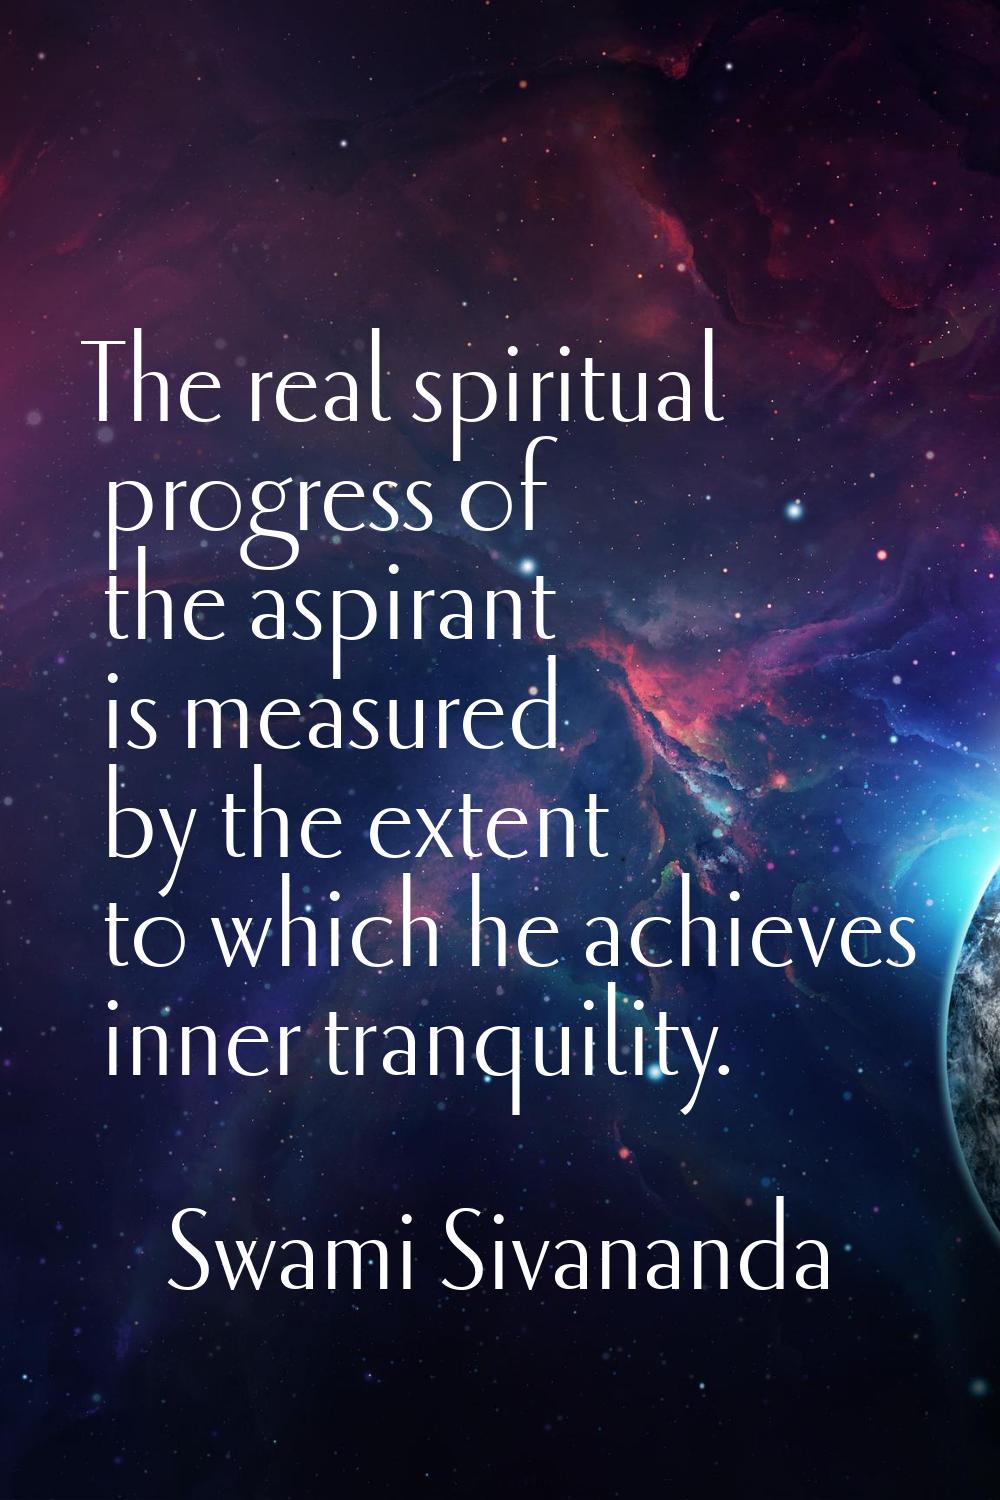 The real spiritual progress of the aspirant is measured by the extent to which he achieves inner tr